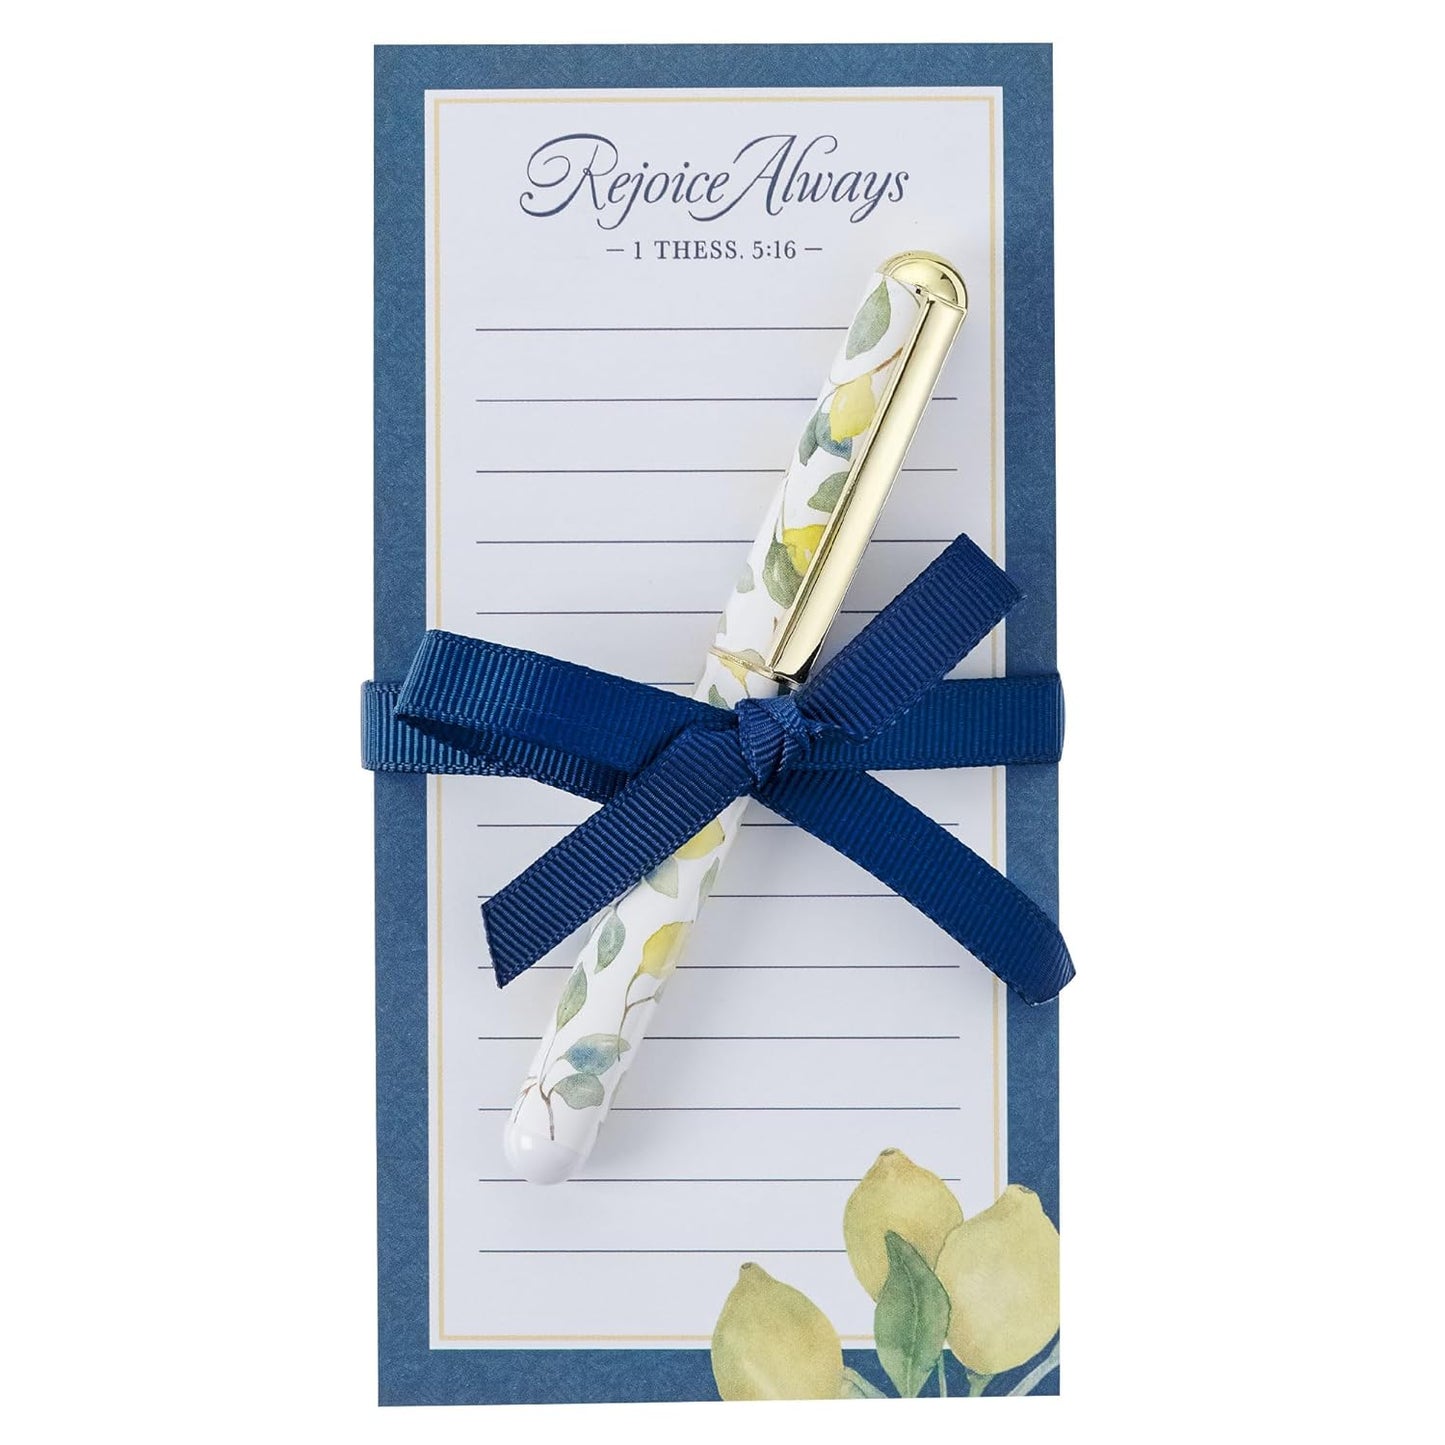 'Rejoice Always' 1 Thess 5:16, Magnetic Notepad w/ Pen